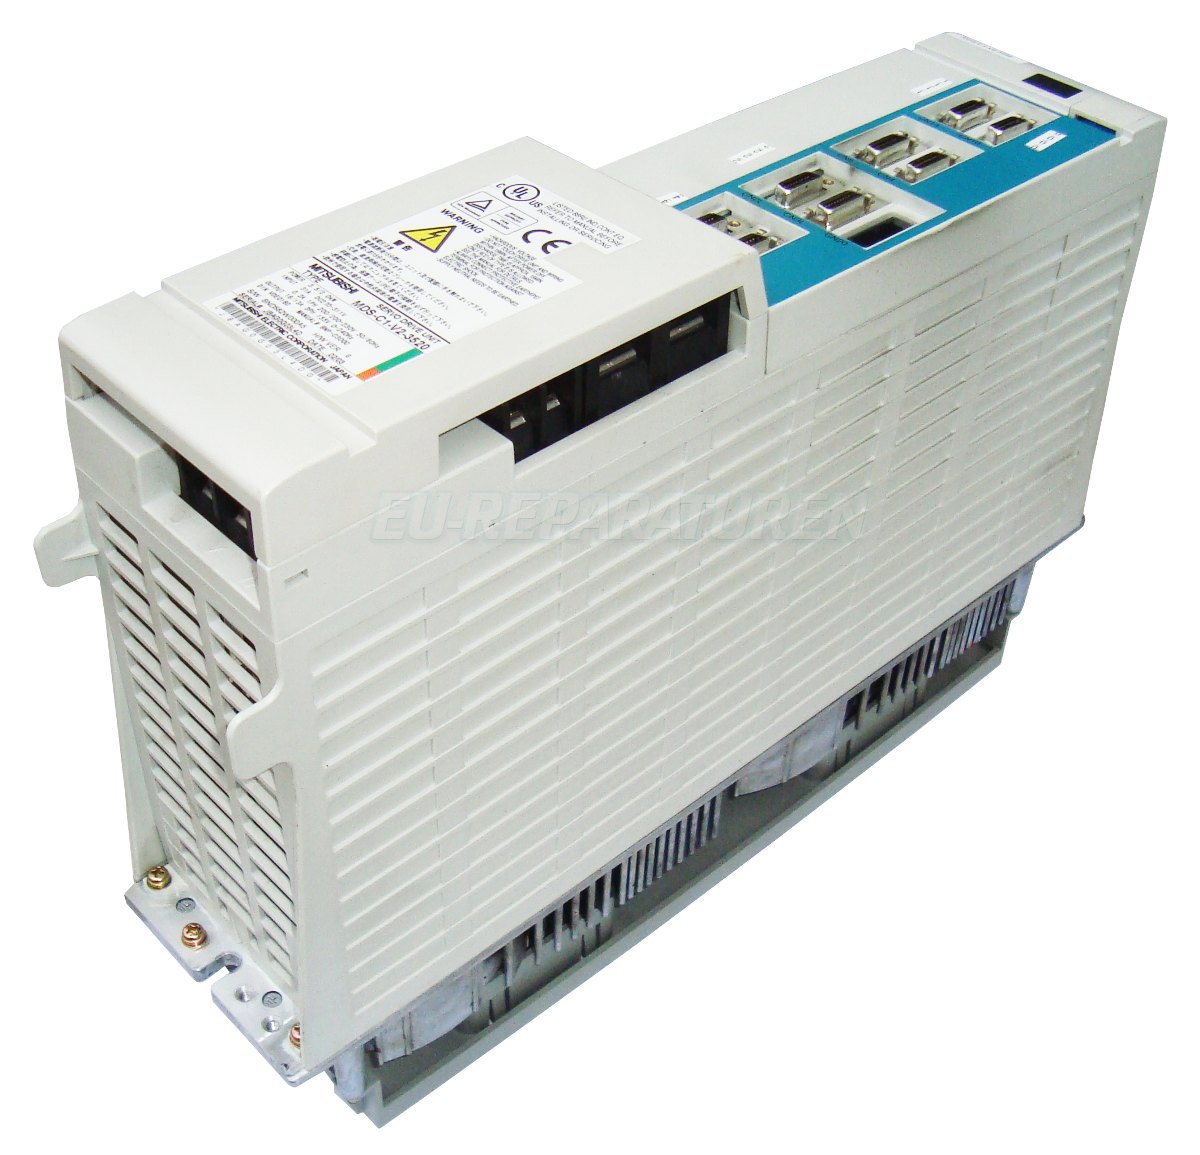 3 Quick Repair Mds-c1-v2-3520 Mitsubishi Frequency Inverter